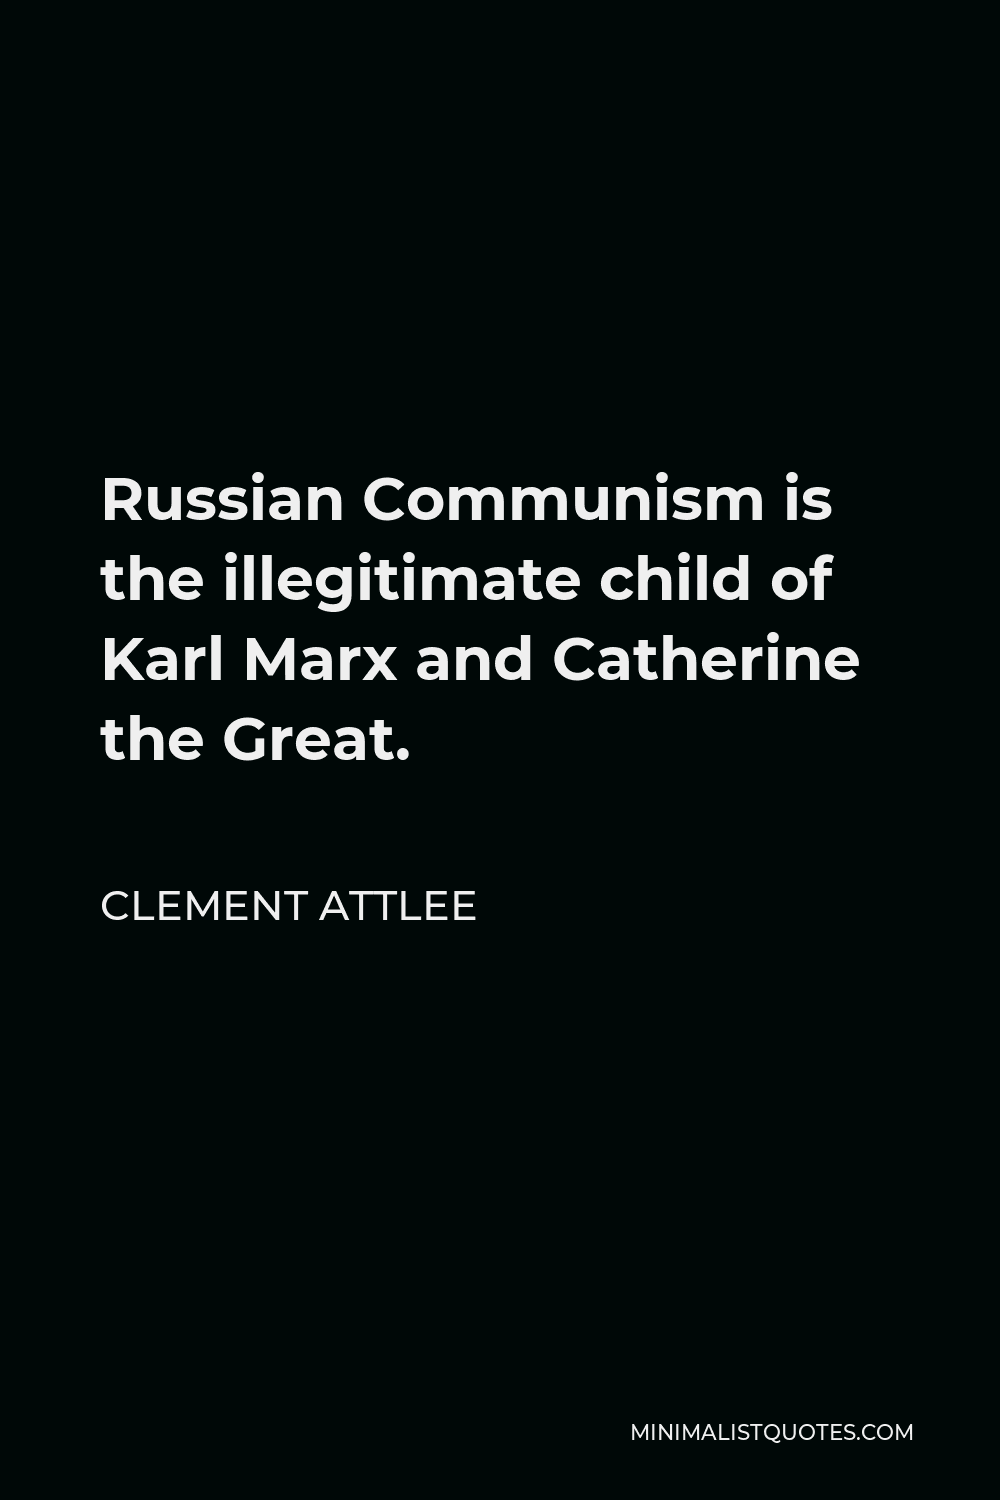 Clement Attlee Quote - Russian Communism is the illegitimate child of Karl Marx and Catherine the Great.